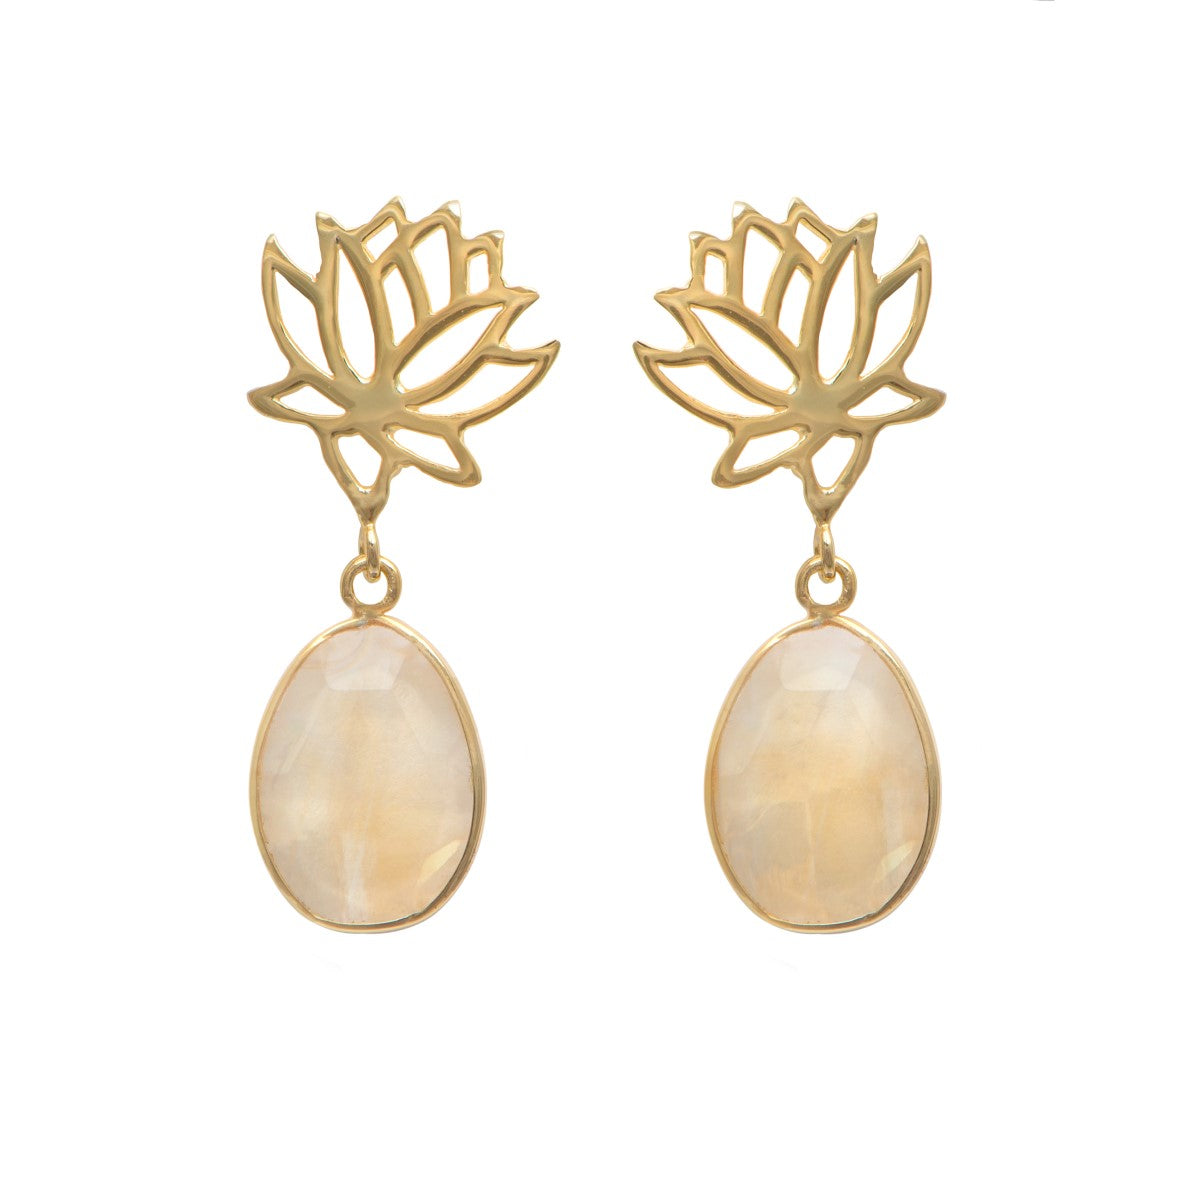 Lotus Earrings in Gold Plated Sterling Silver with a Citrine Gemstone Drop